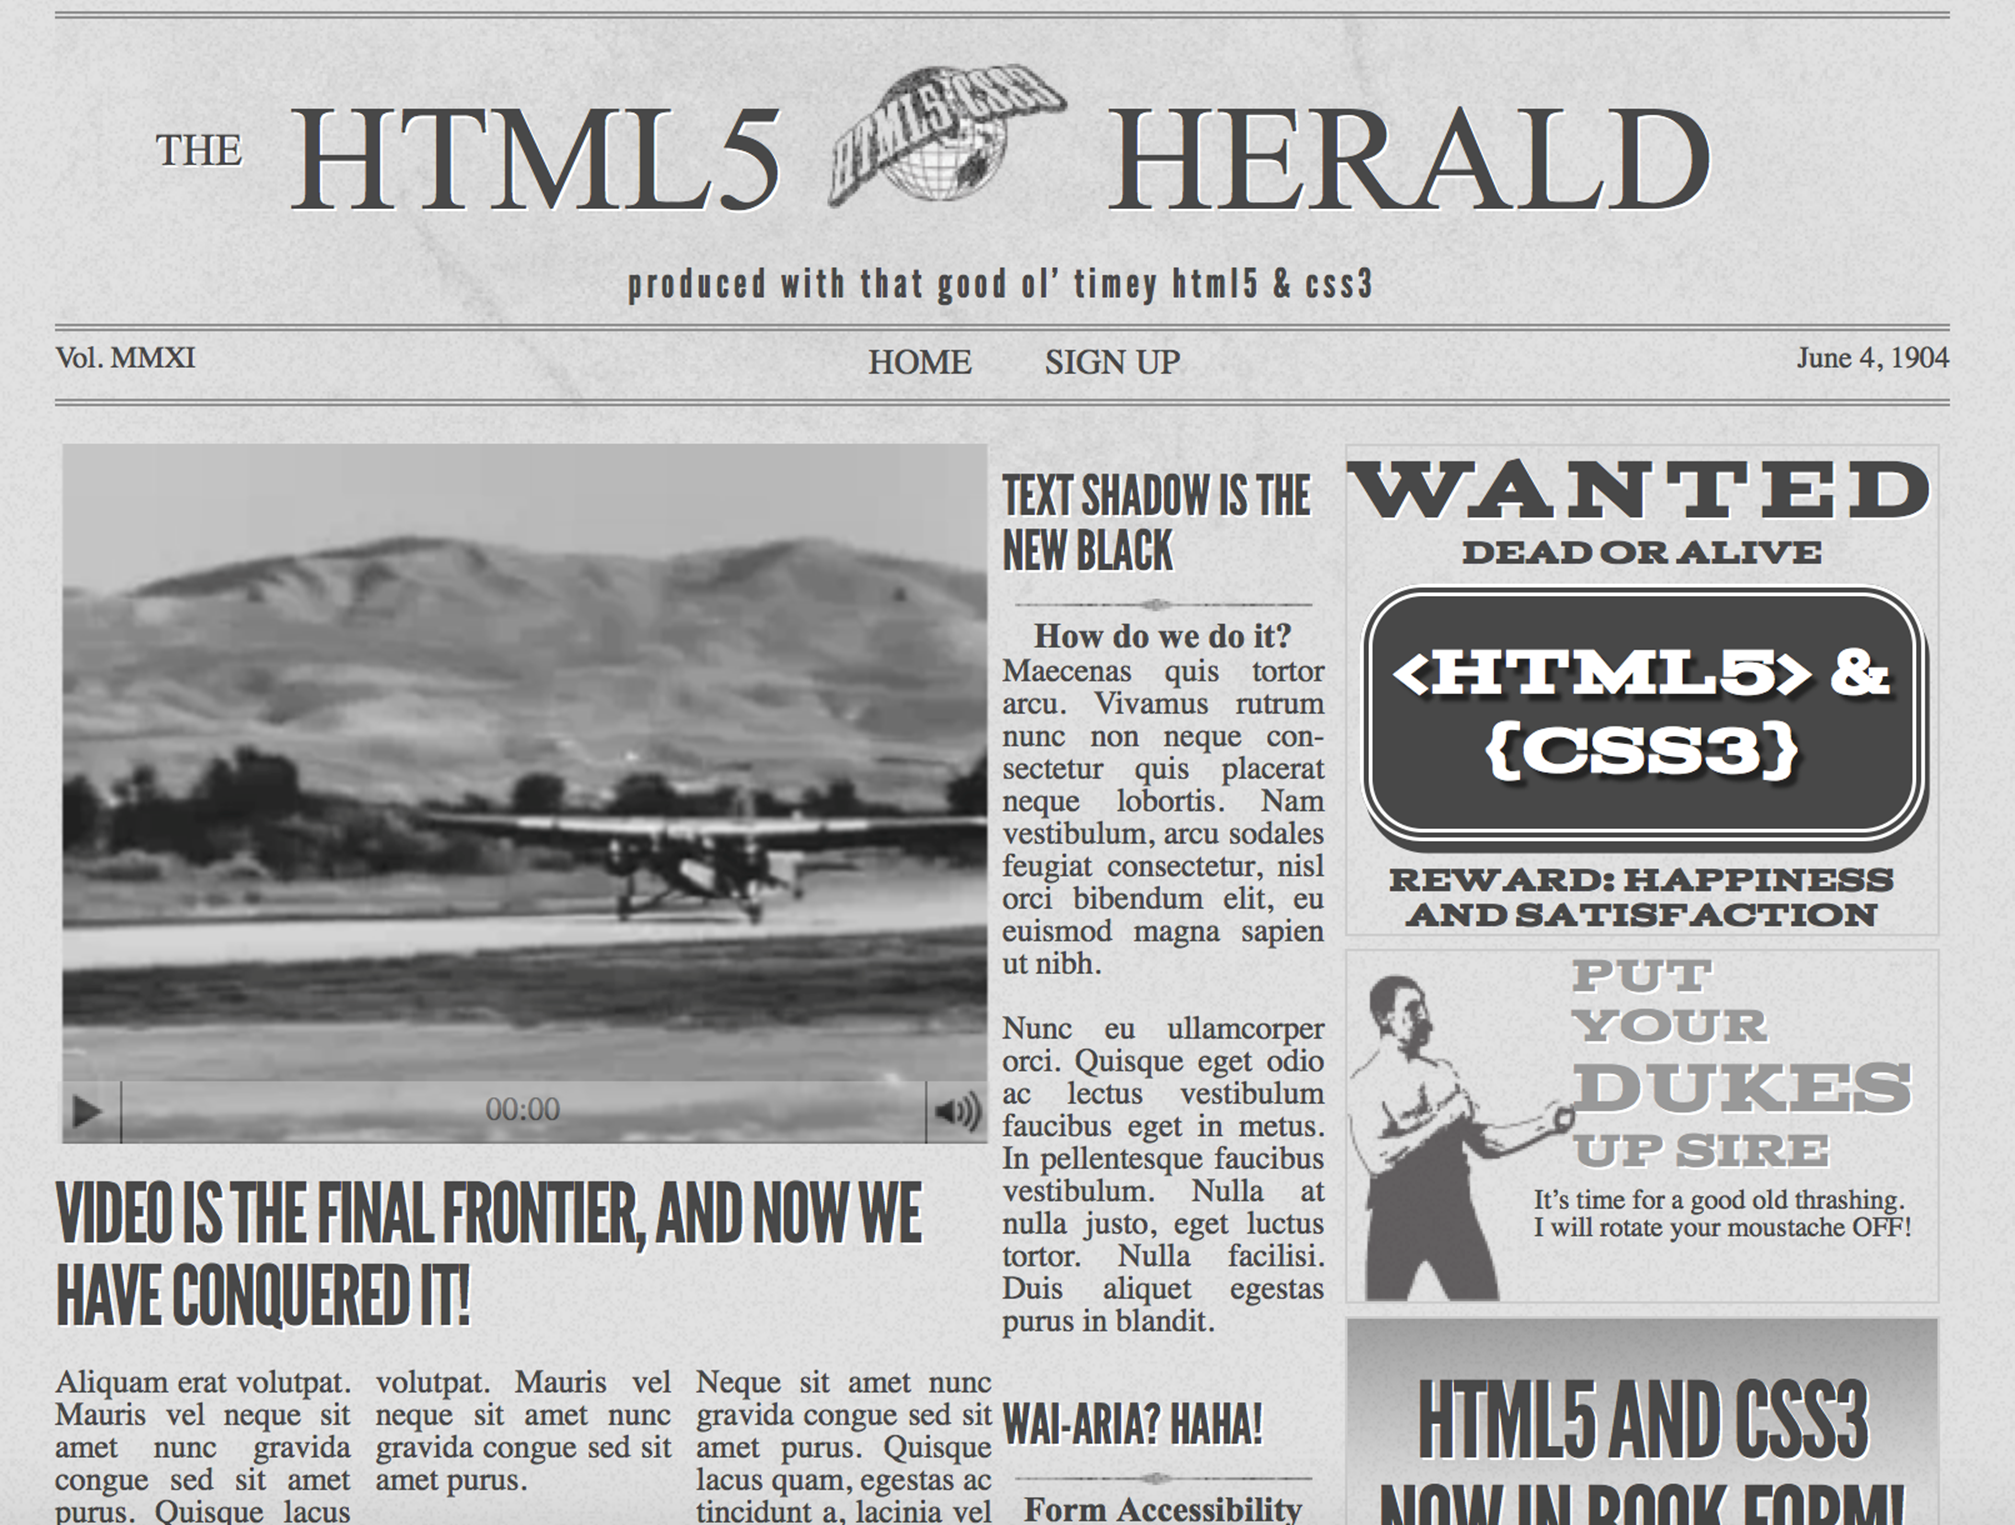 The front page of The HTML5 Herald